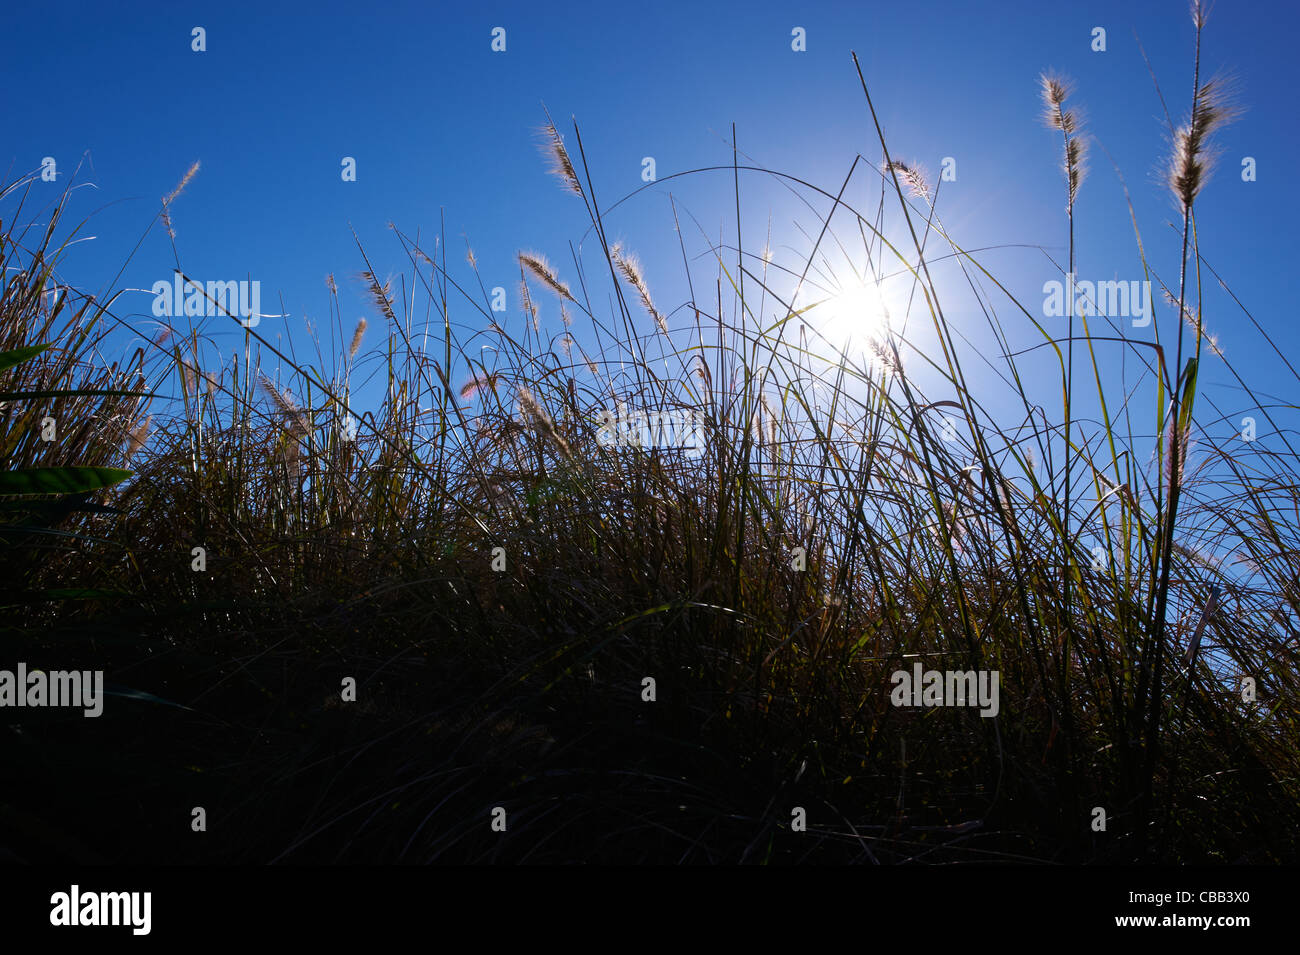 Close-up view of grasses with blue sky Stock Photo